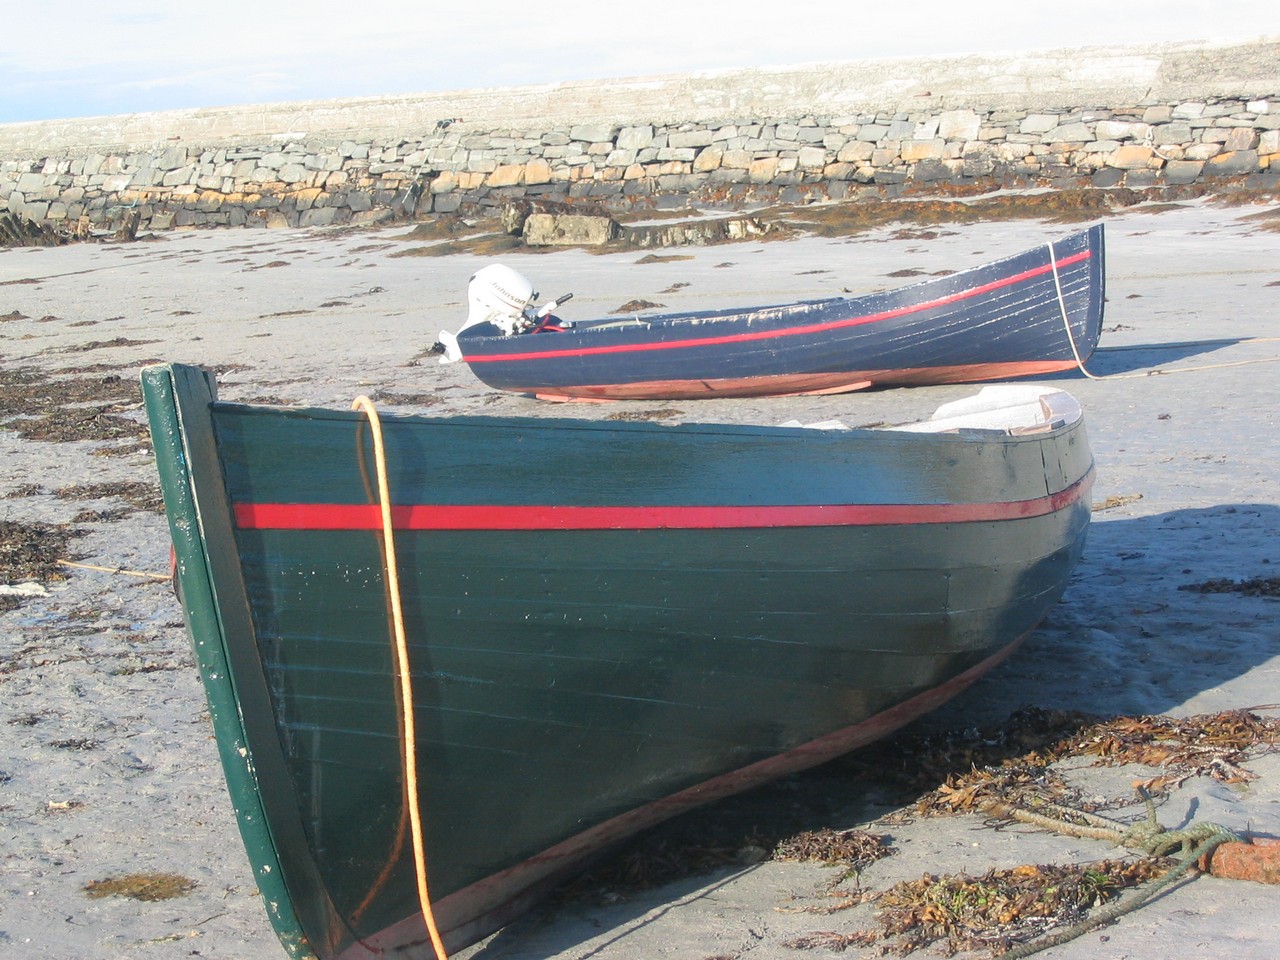 Boats on the beach at the East End.